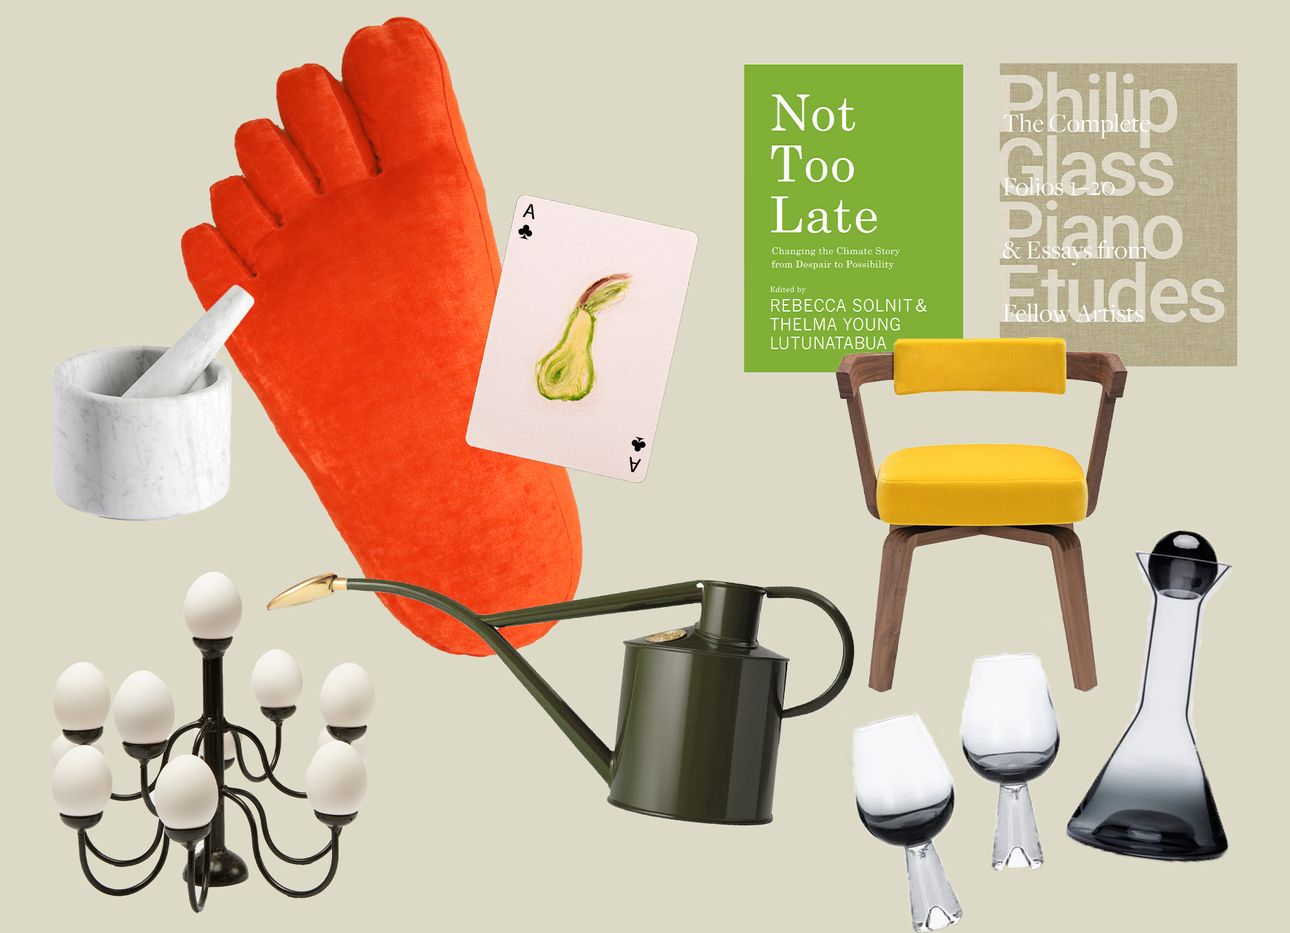 Clockwise from bottom left: Gohar World Egg Chandelier, Mini; Salvatori Ellipse Mortar and Pestle; Sohn Foot Pillow; Theory11 x Eleven Madison Park Limited-Edition Playing Cards; “Not Too Late”; “Philip Glass Piano Etudes”; Molteni & C Porta Volta Chair; Tom Dixon Tank Wine Set; Haws x Gardenheir watering cans.